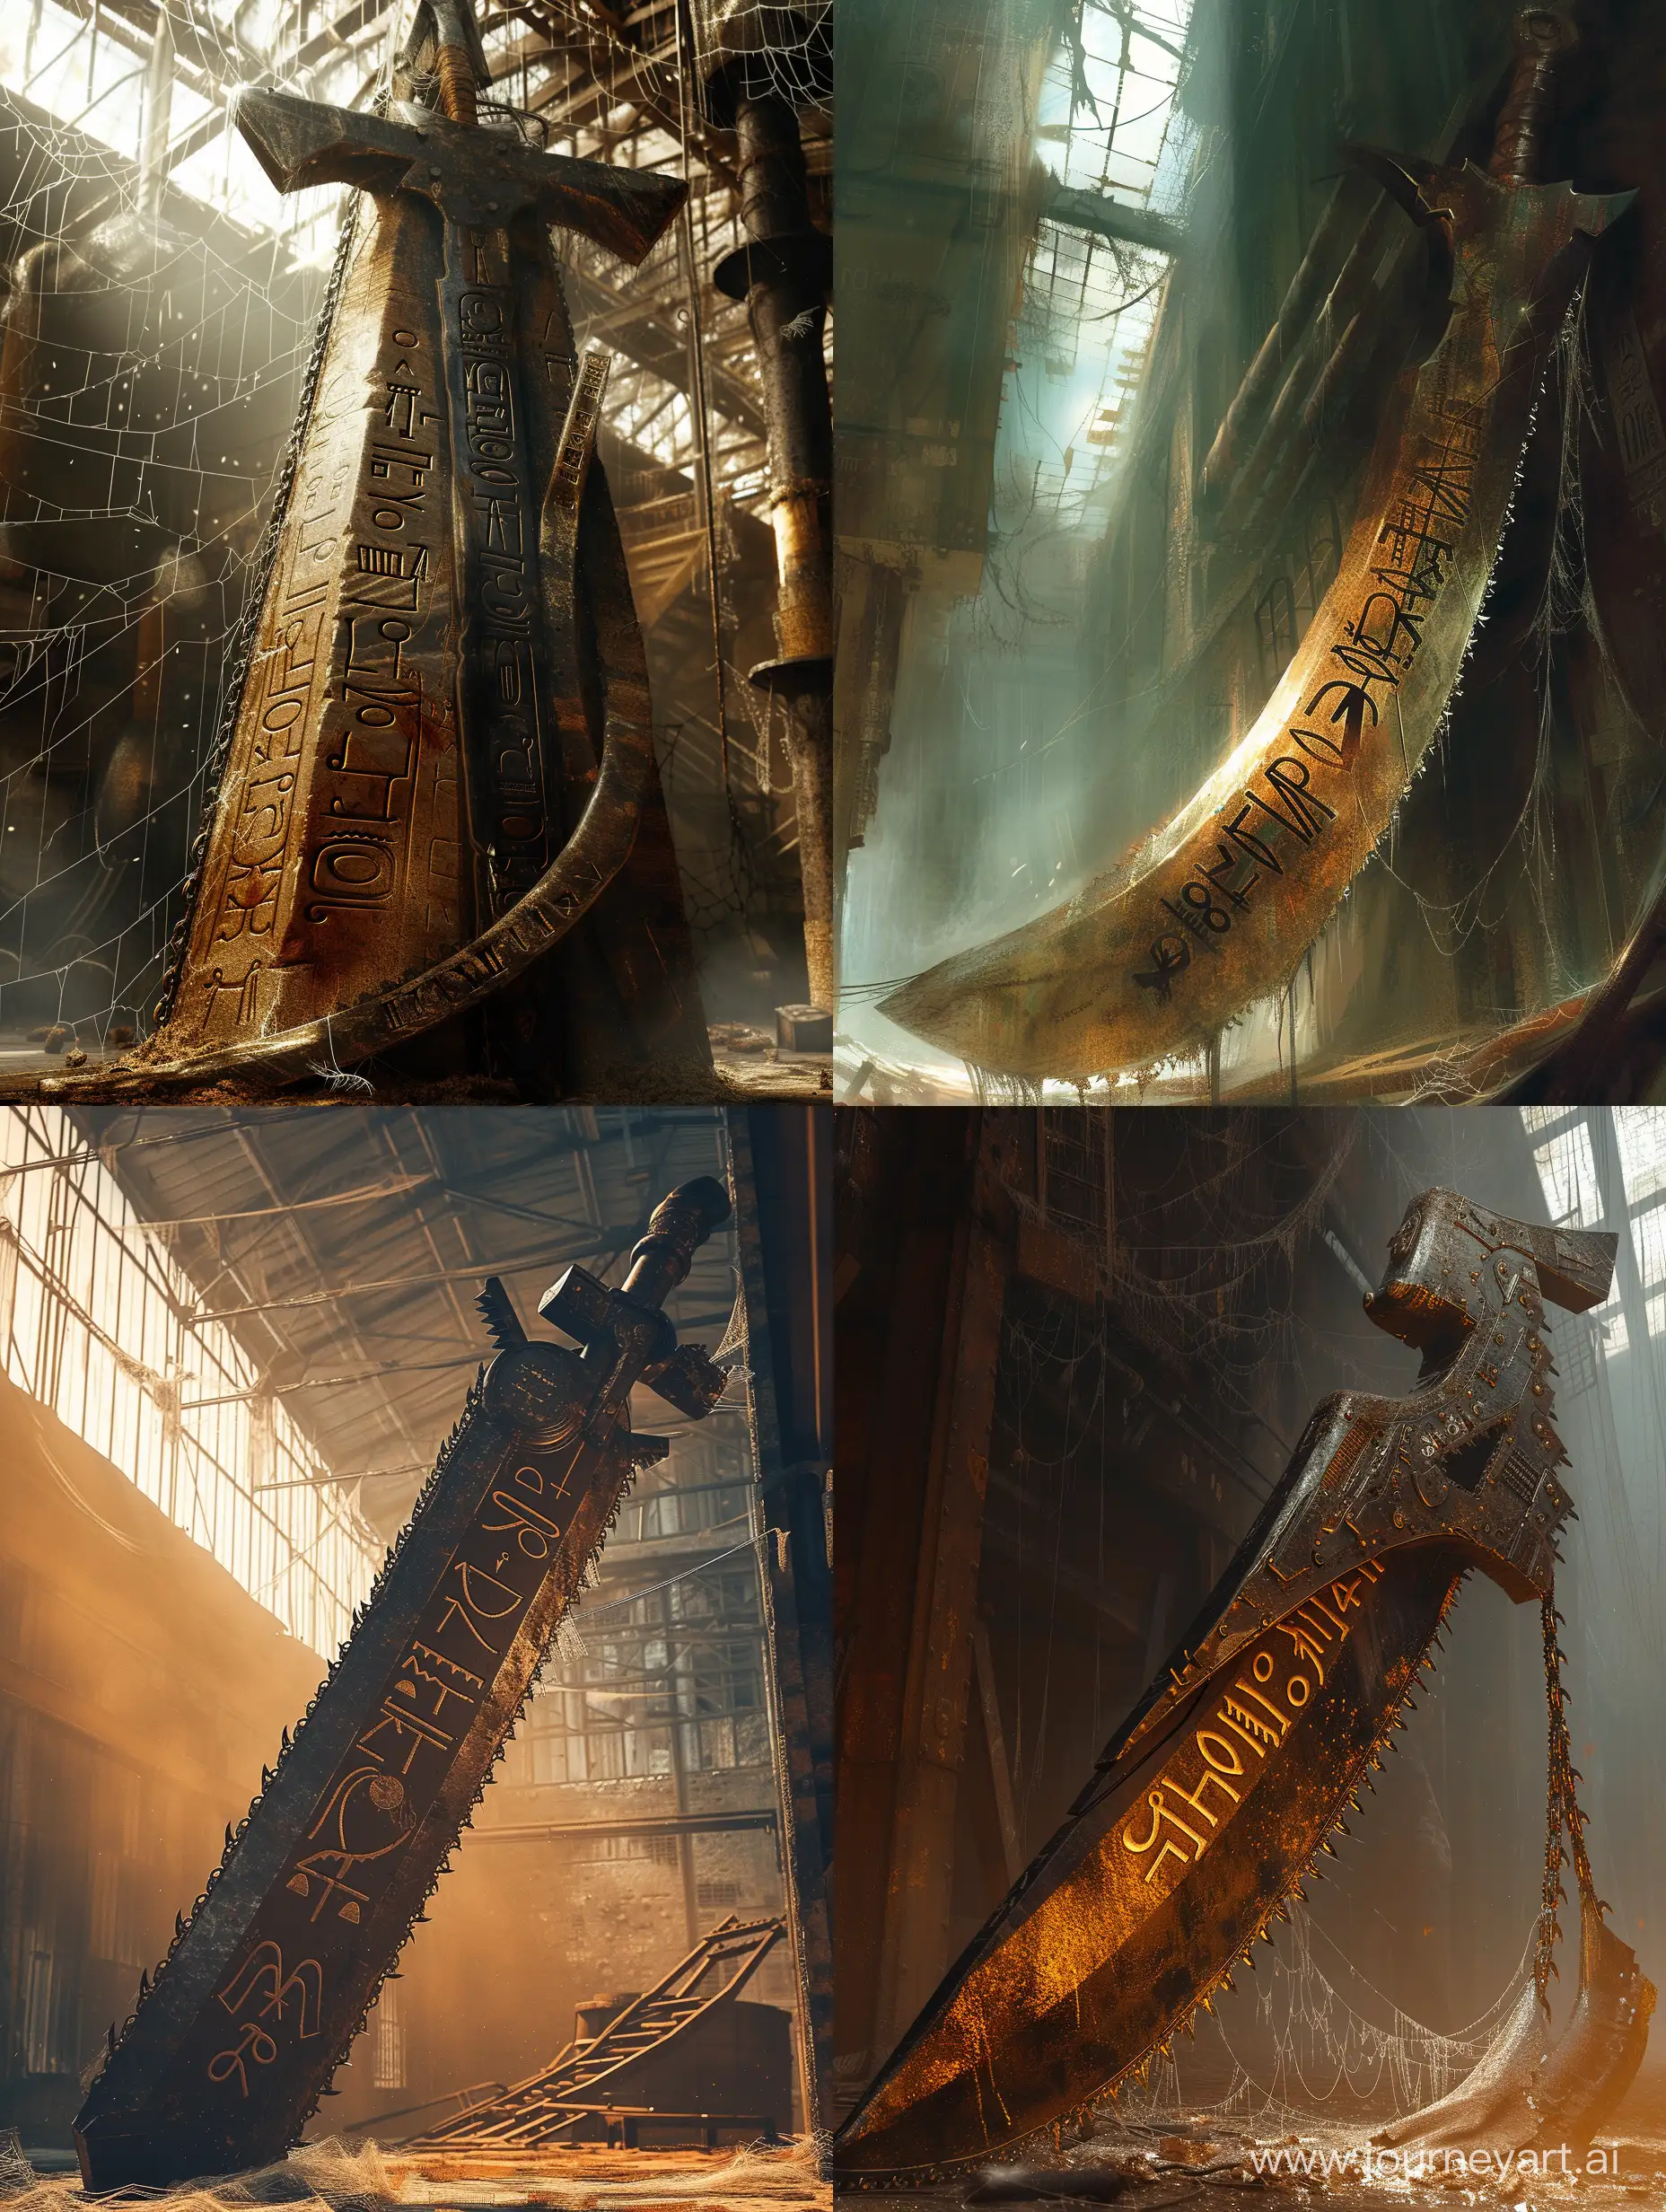 A combination of sword and chainsaw,cuneiform letters curving on it,intricate curving,Inside an old warehouse, cobwebs on it,steampunk.incredible detail,warm light,terrifying.